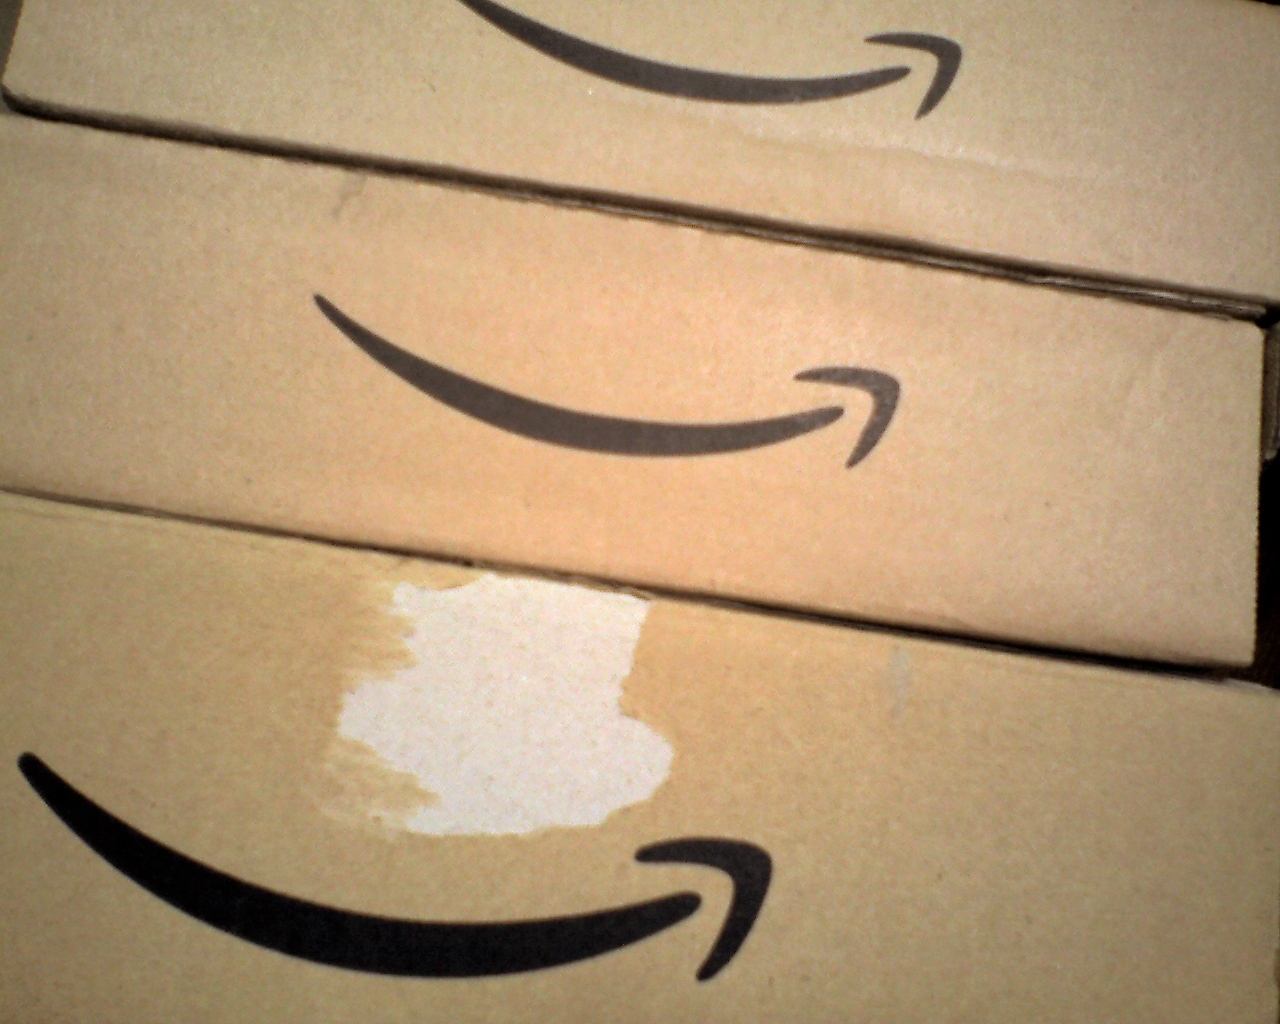 Amazon Won’t Say If Employee Added Unrequested Dildo To Customer’s Cart